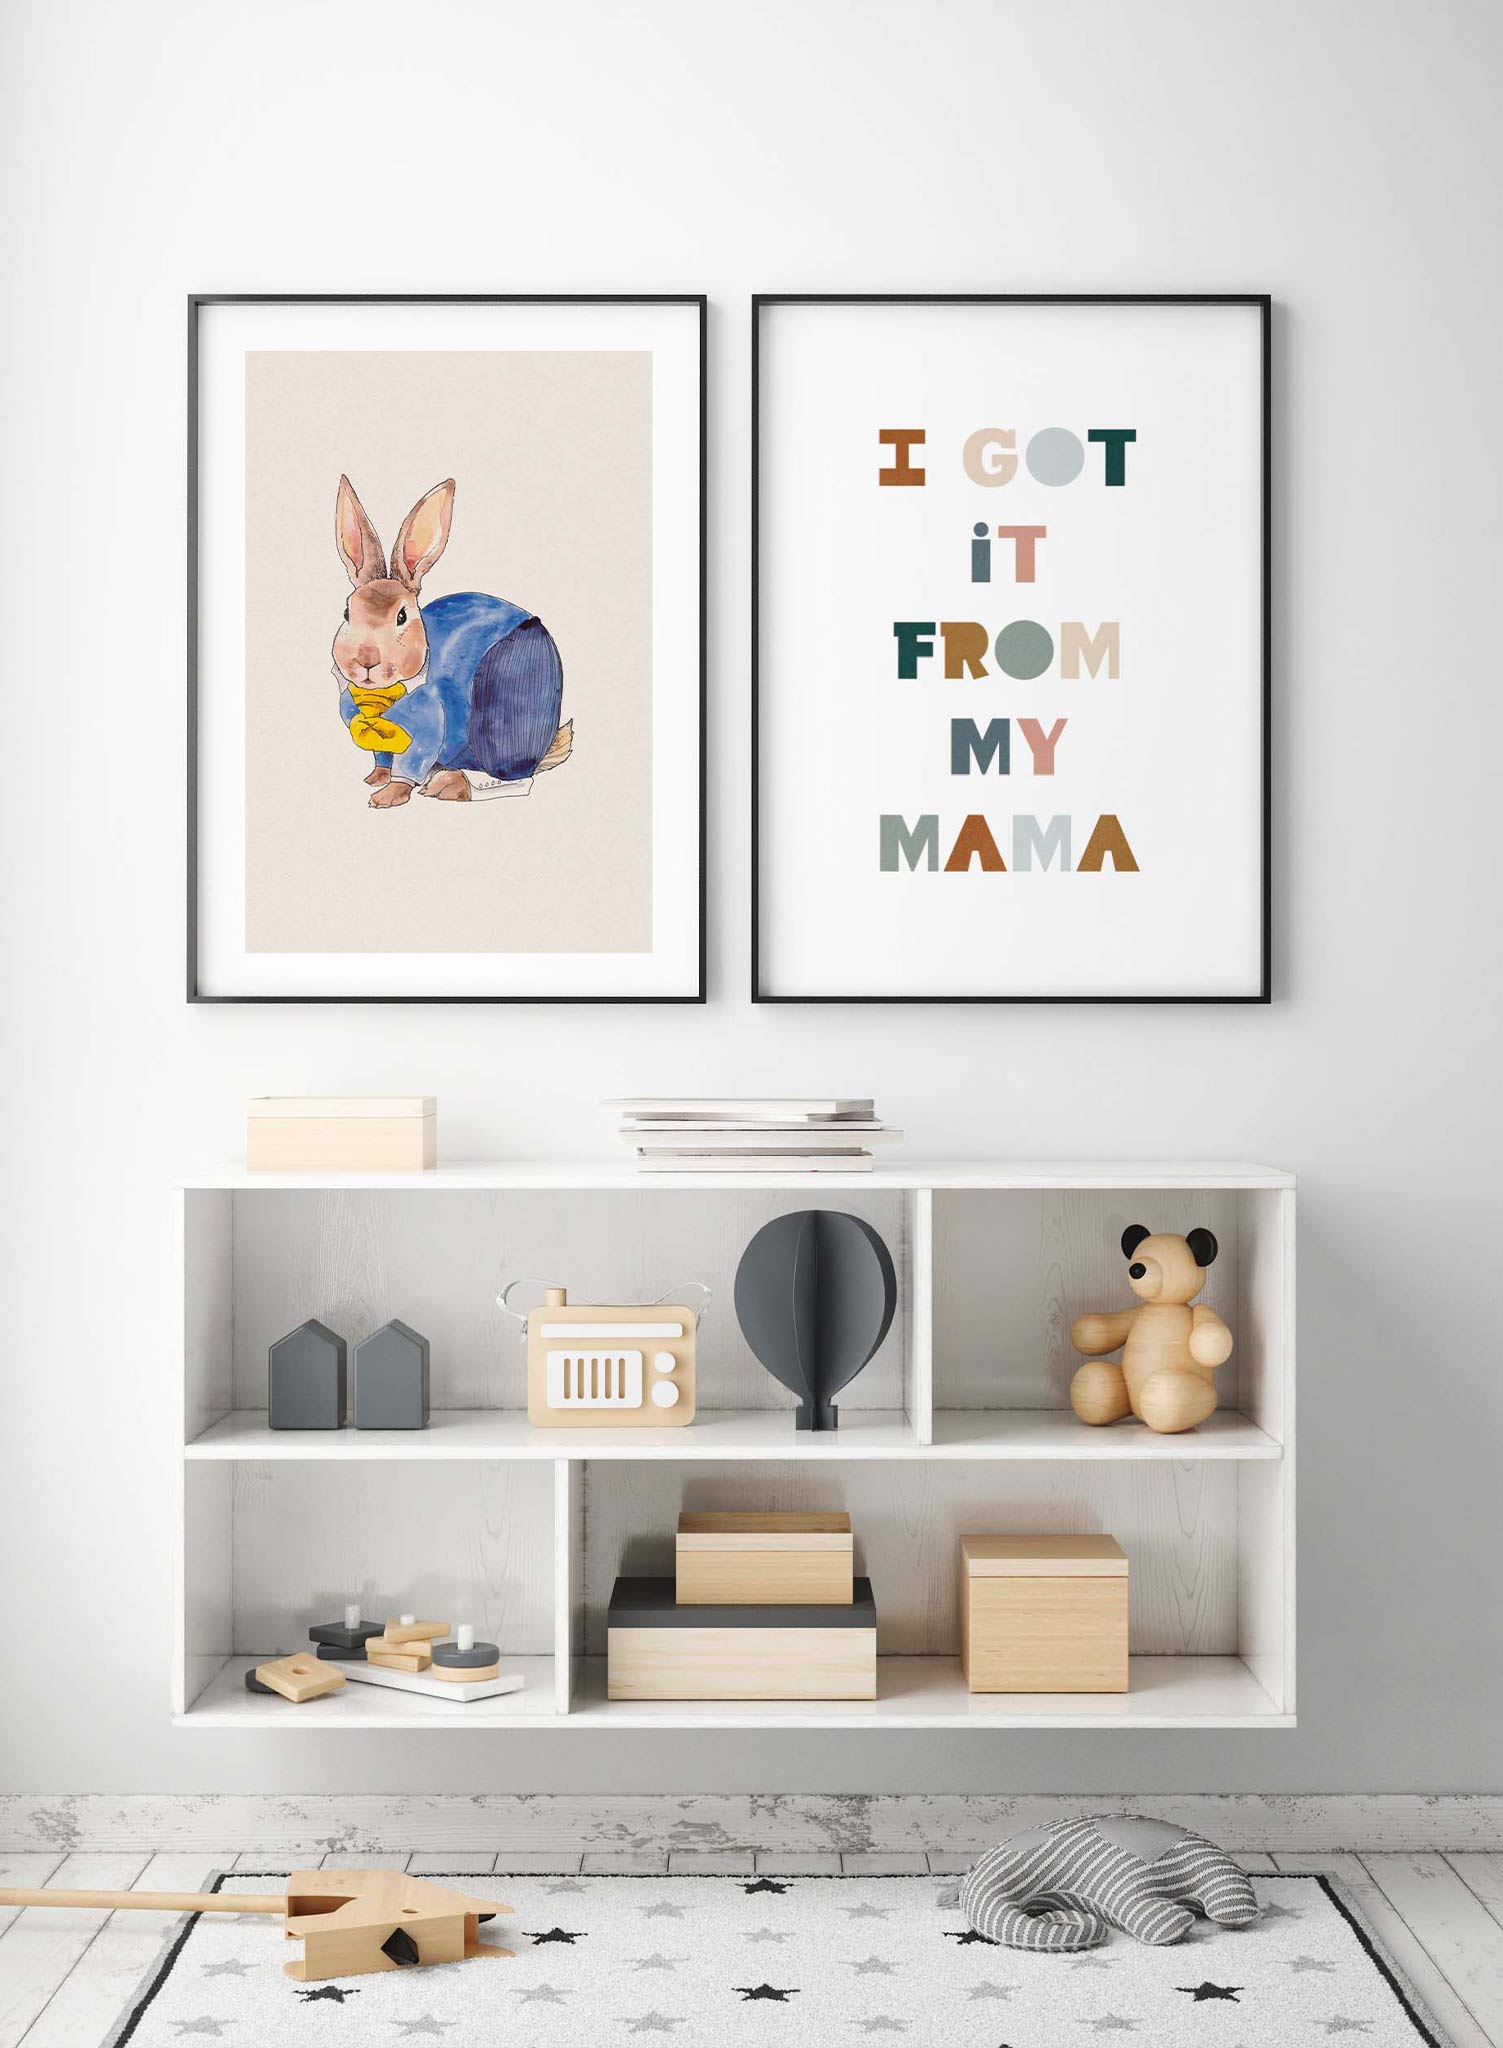 Magical Bunny is a minimalist illustration by Opposite Wall of a bunny wearing a fancy suit while sitting down.